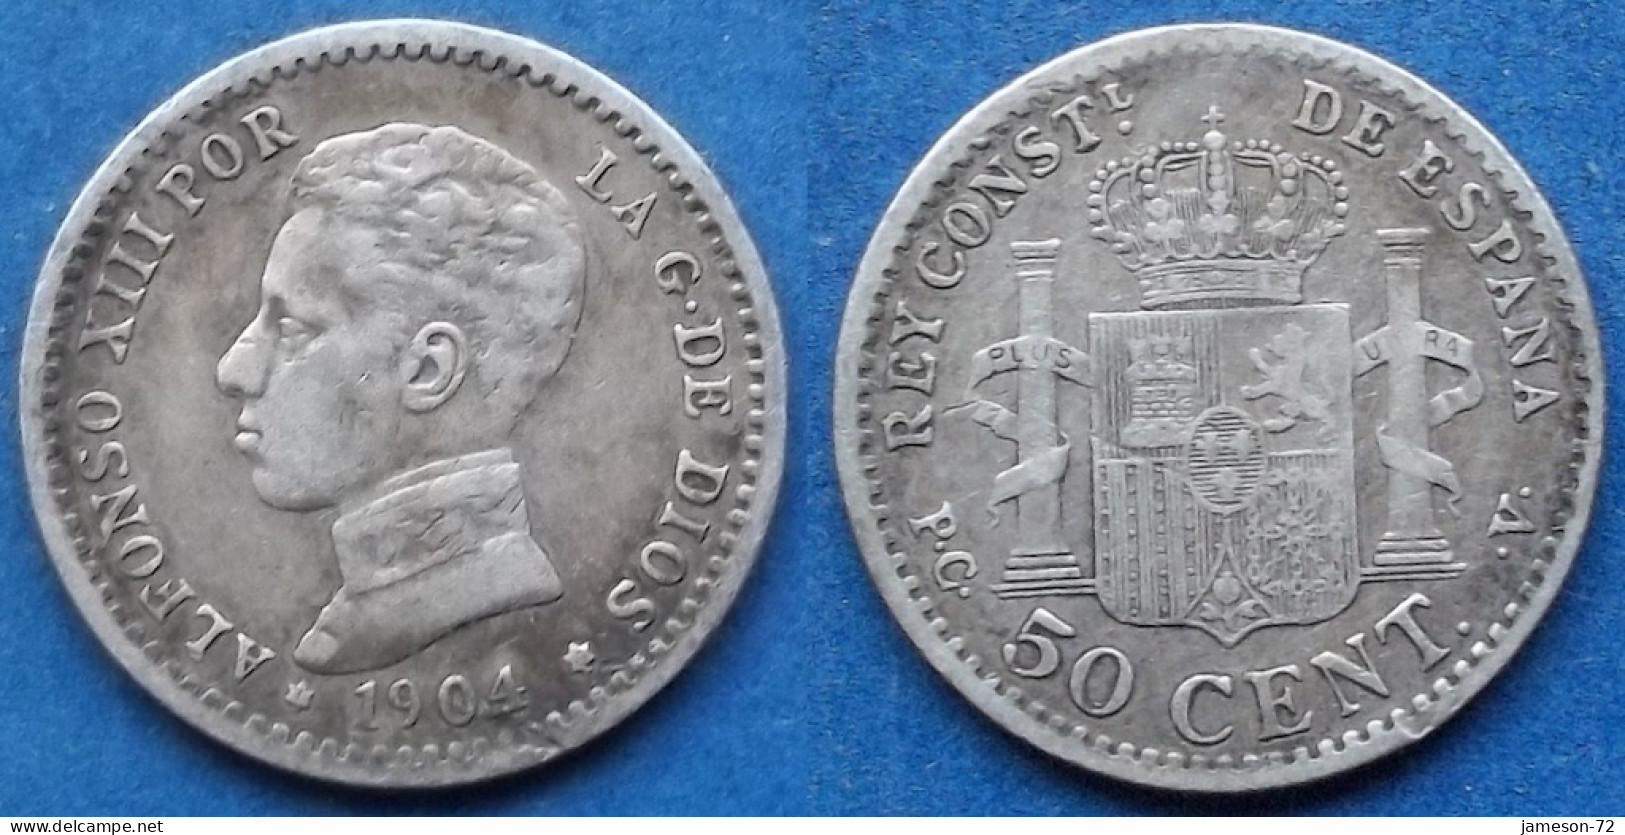 SPAIN - Silver 50 Centimos 1904 (10) PC V KM# 723 Alfonso XIII (1886-1931) - Edelweiss Coins - Primi Conii